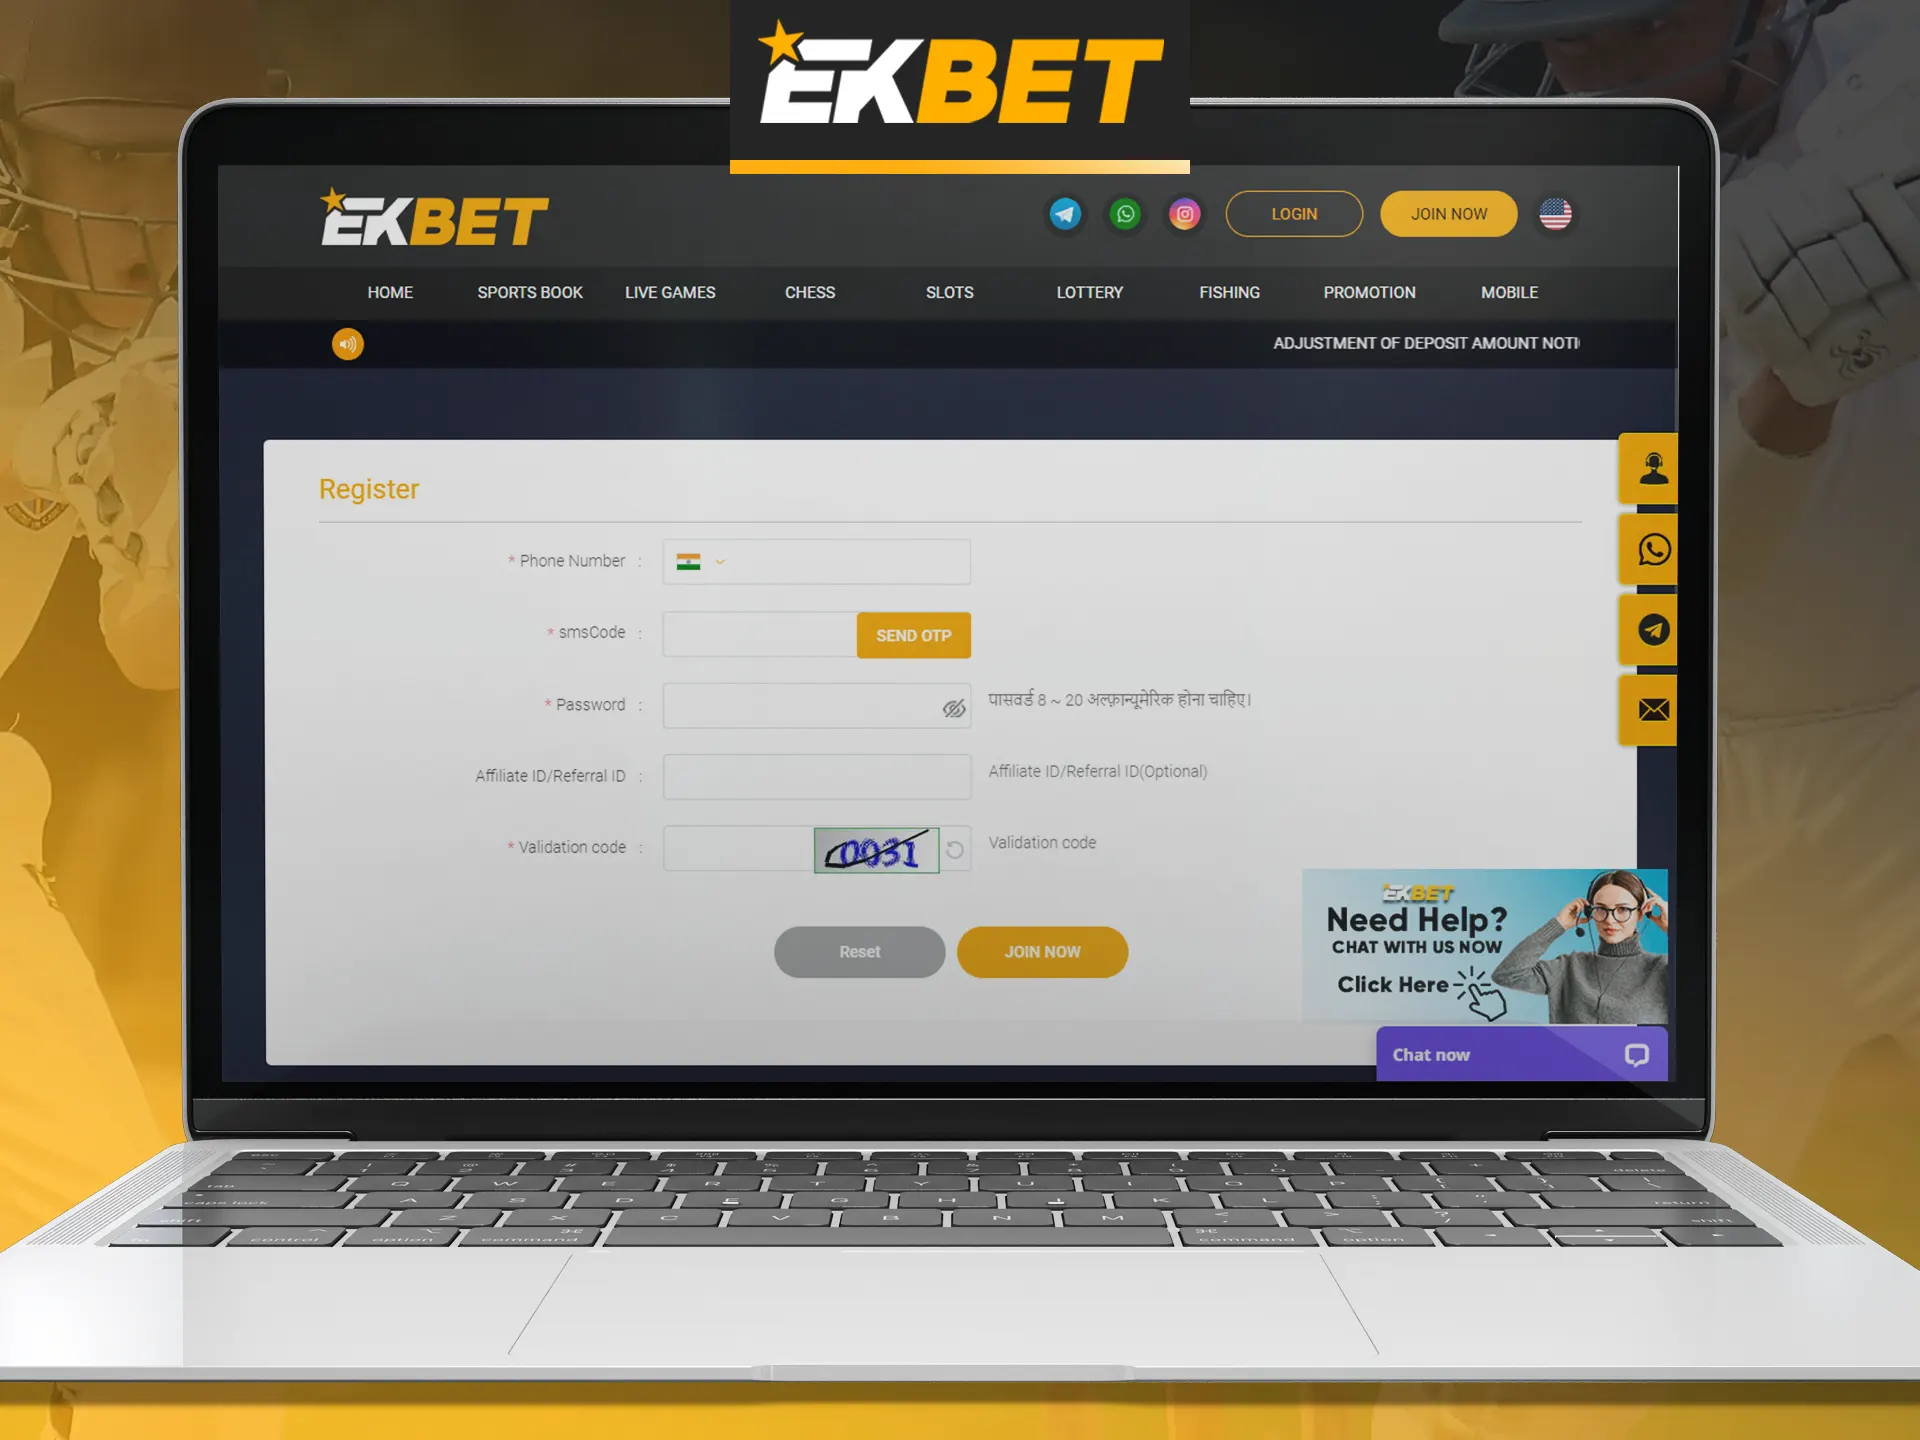 Signing up for EKbet is quick and easy.